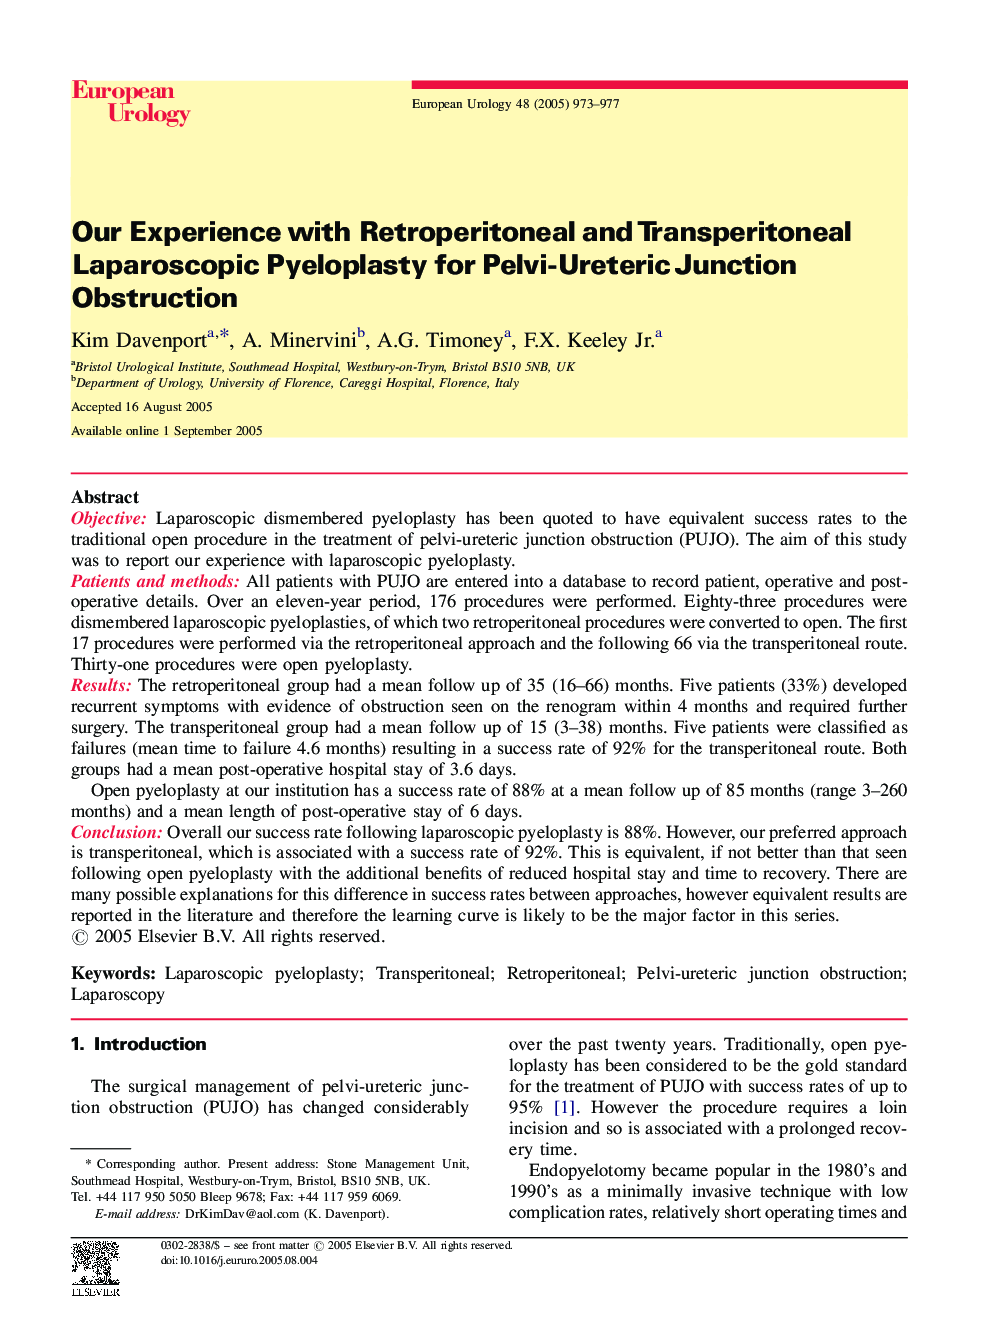 Our Experience with Retroperitoneal and Transperitoneal Laparoscopic Pyeloplasty for Pelvi-Ureteric Junction Obstruction